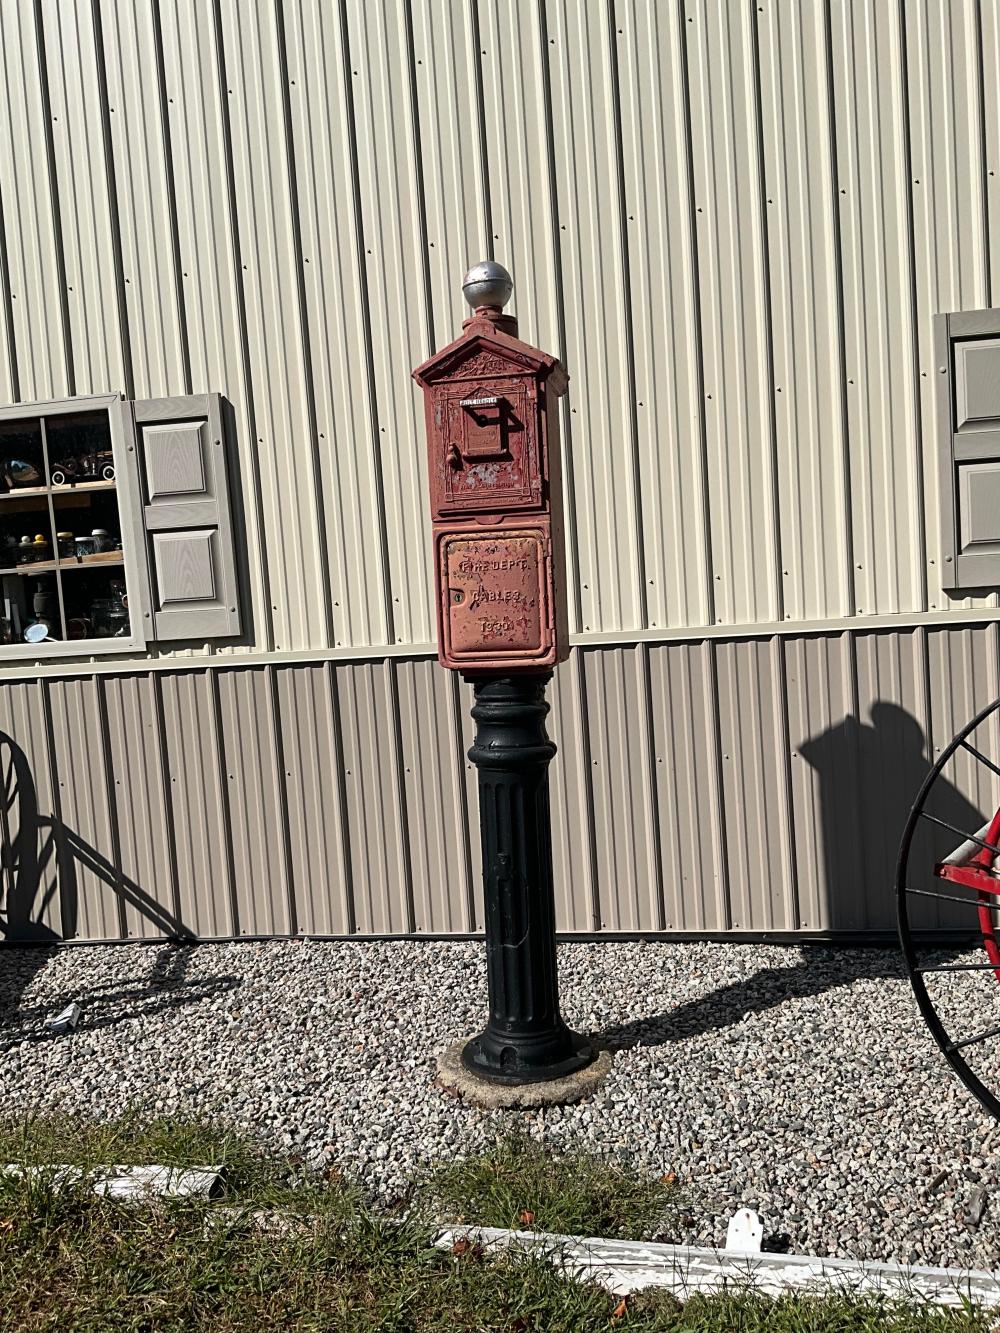 GAMEWELL FIRE CALL BOX 20TH CENTURY